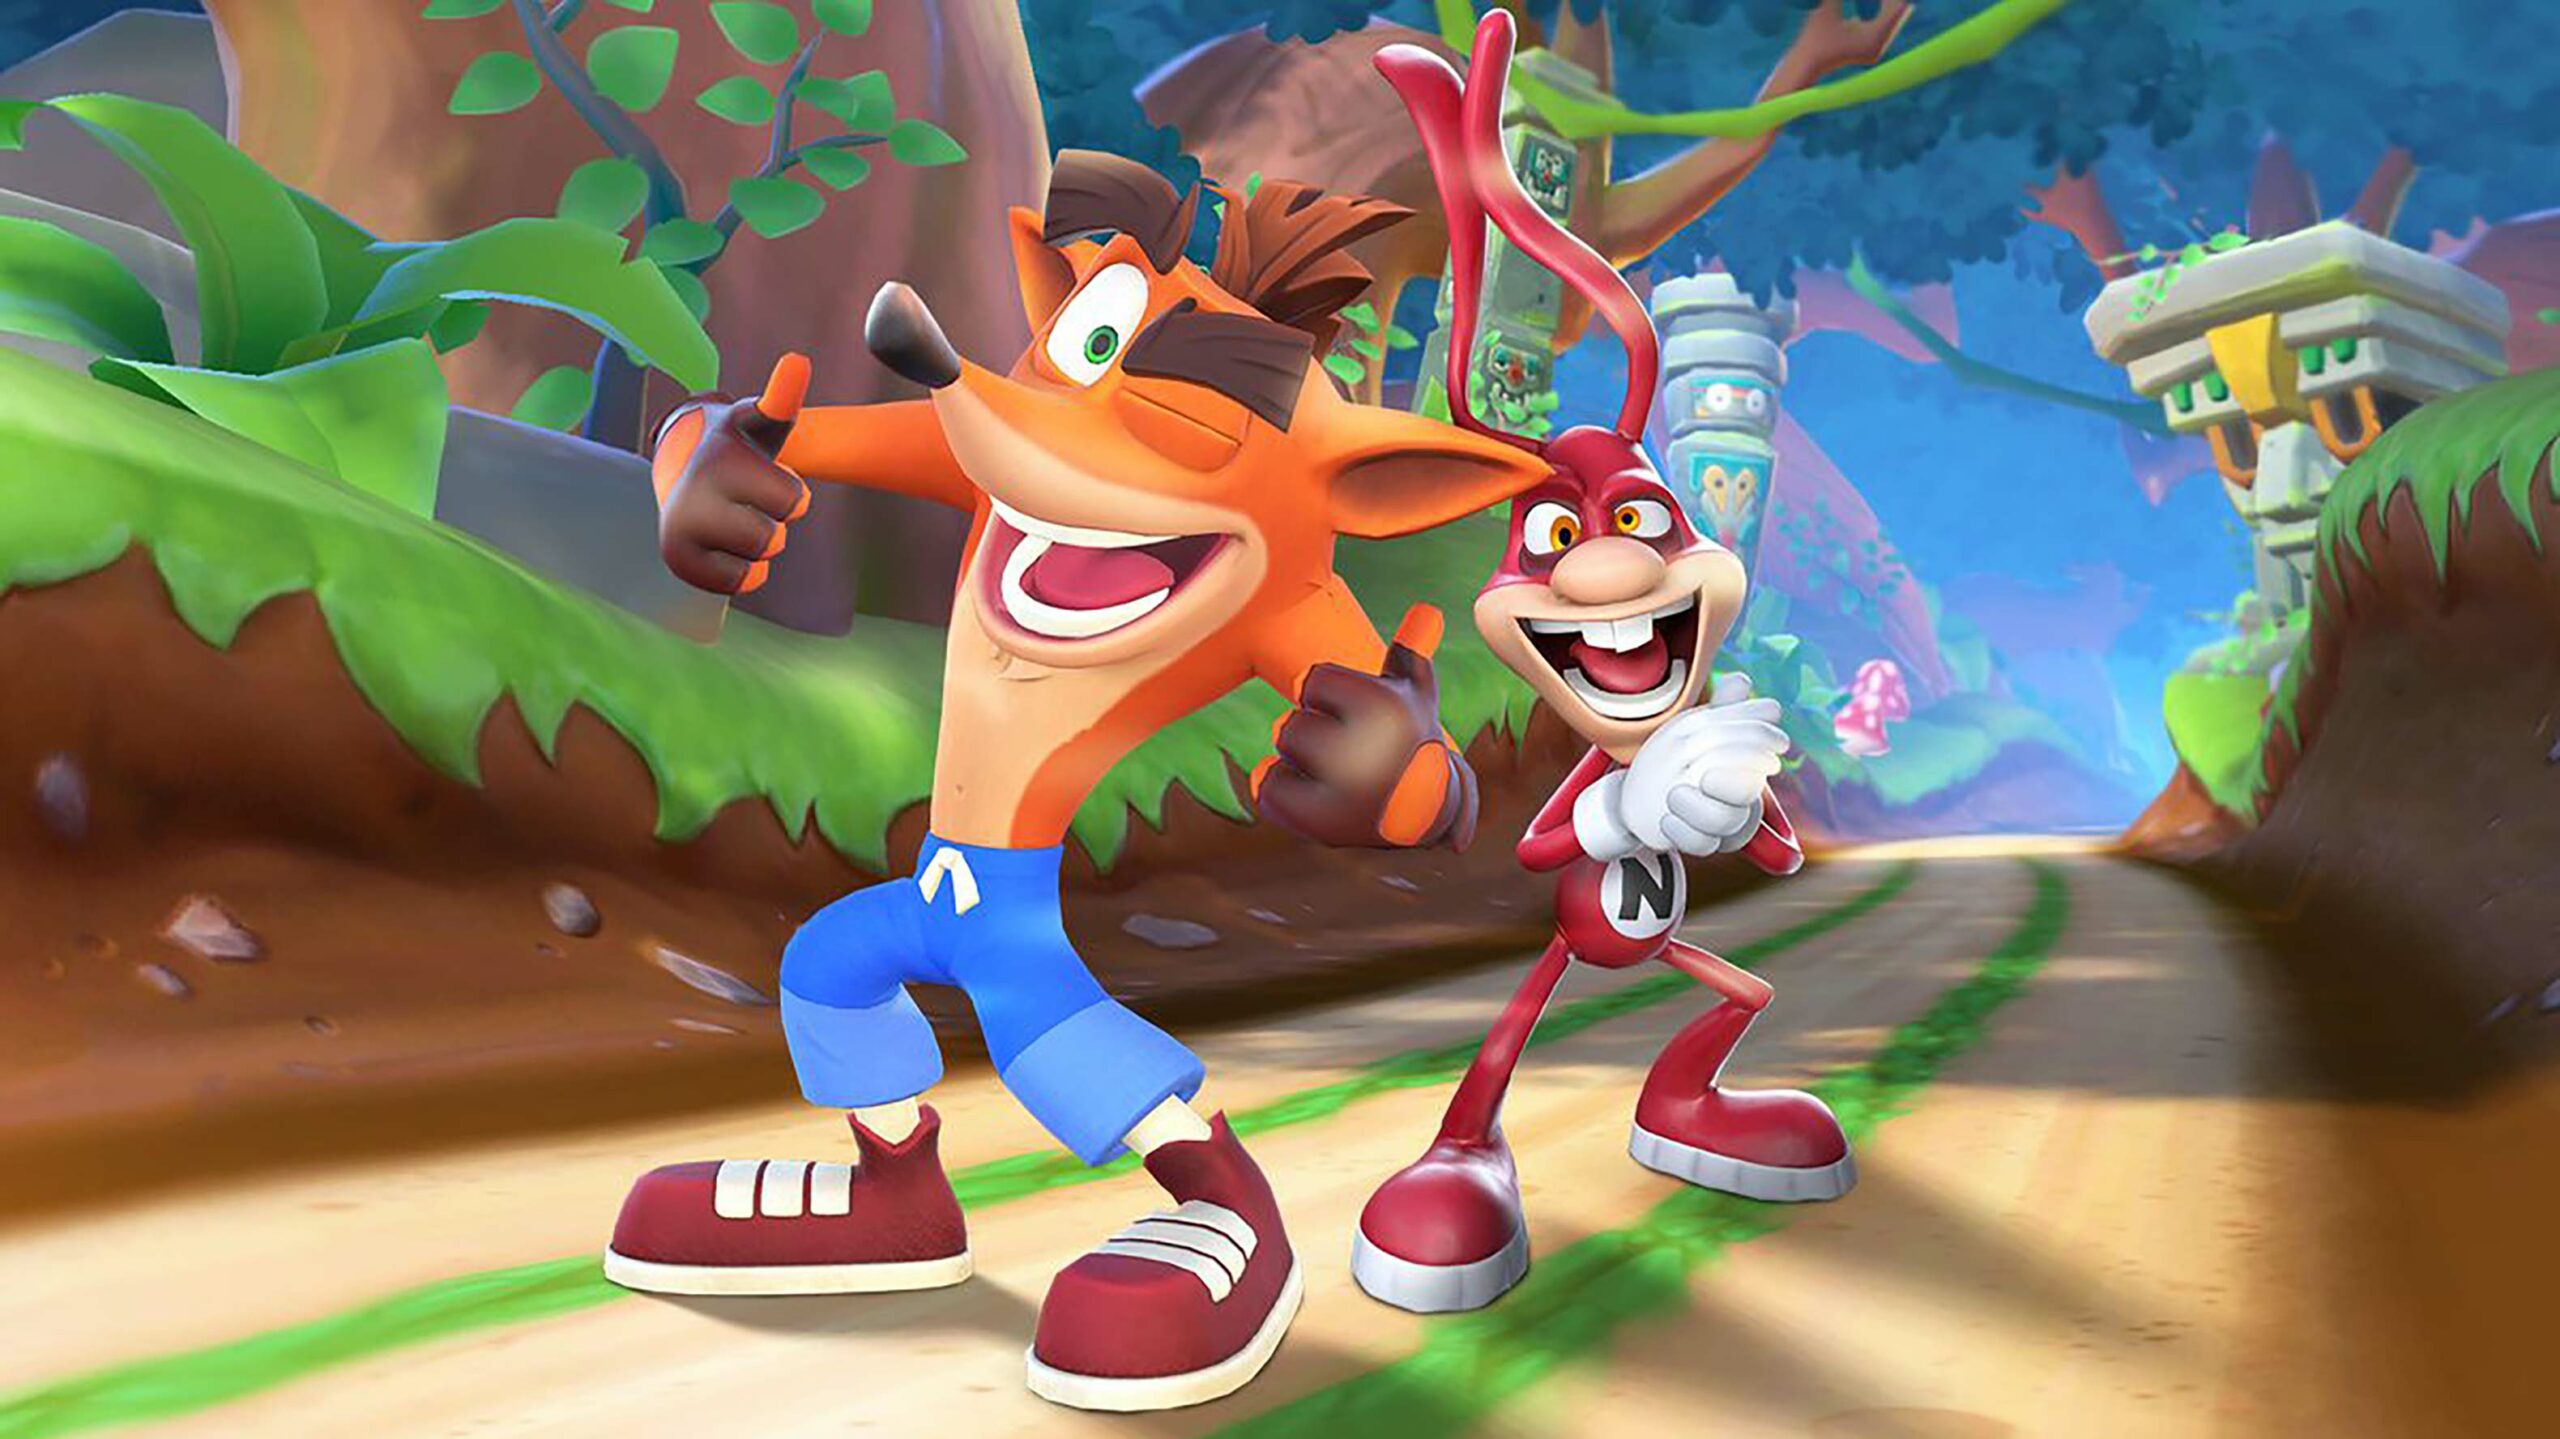 Crash and The Noid